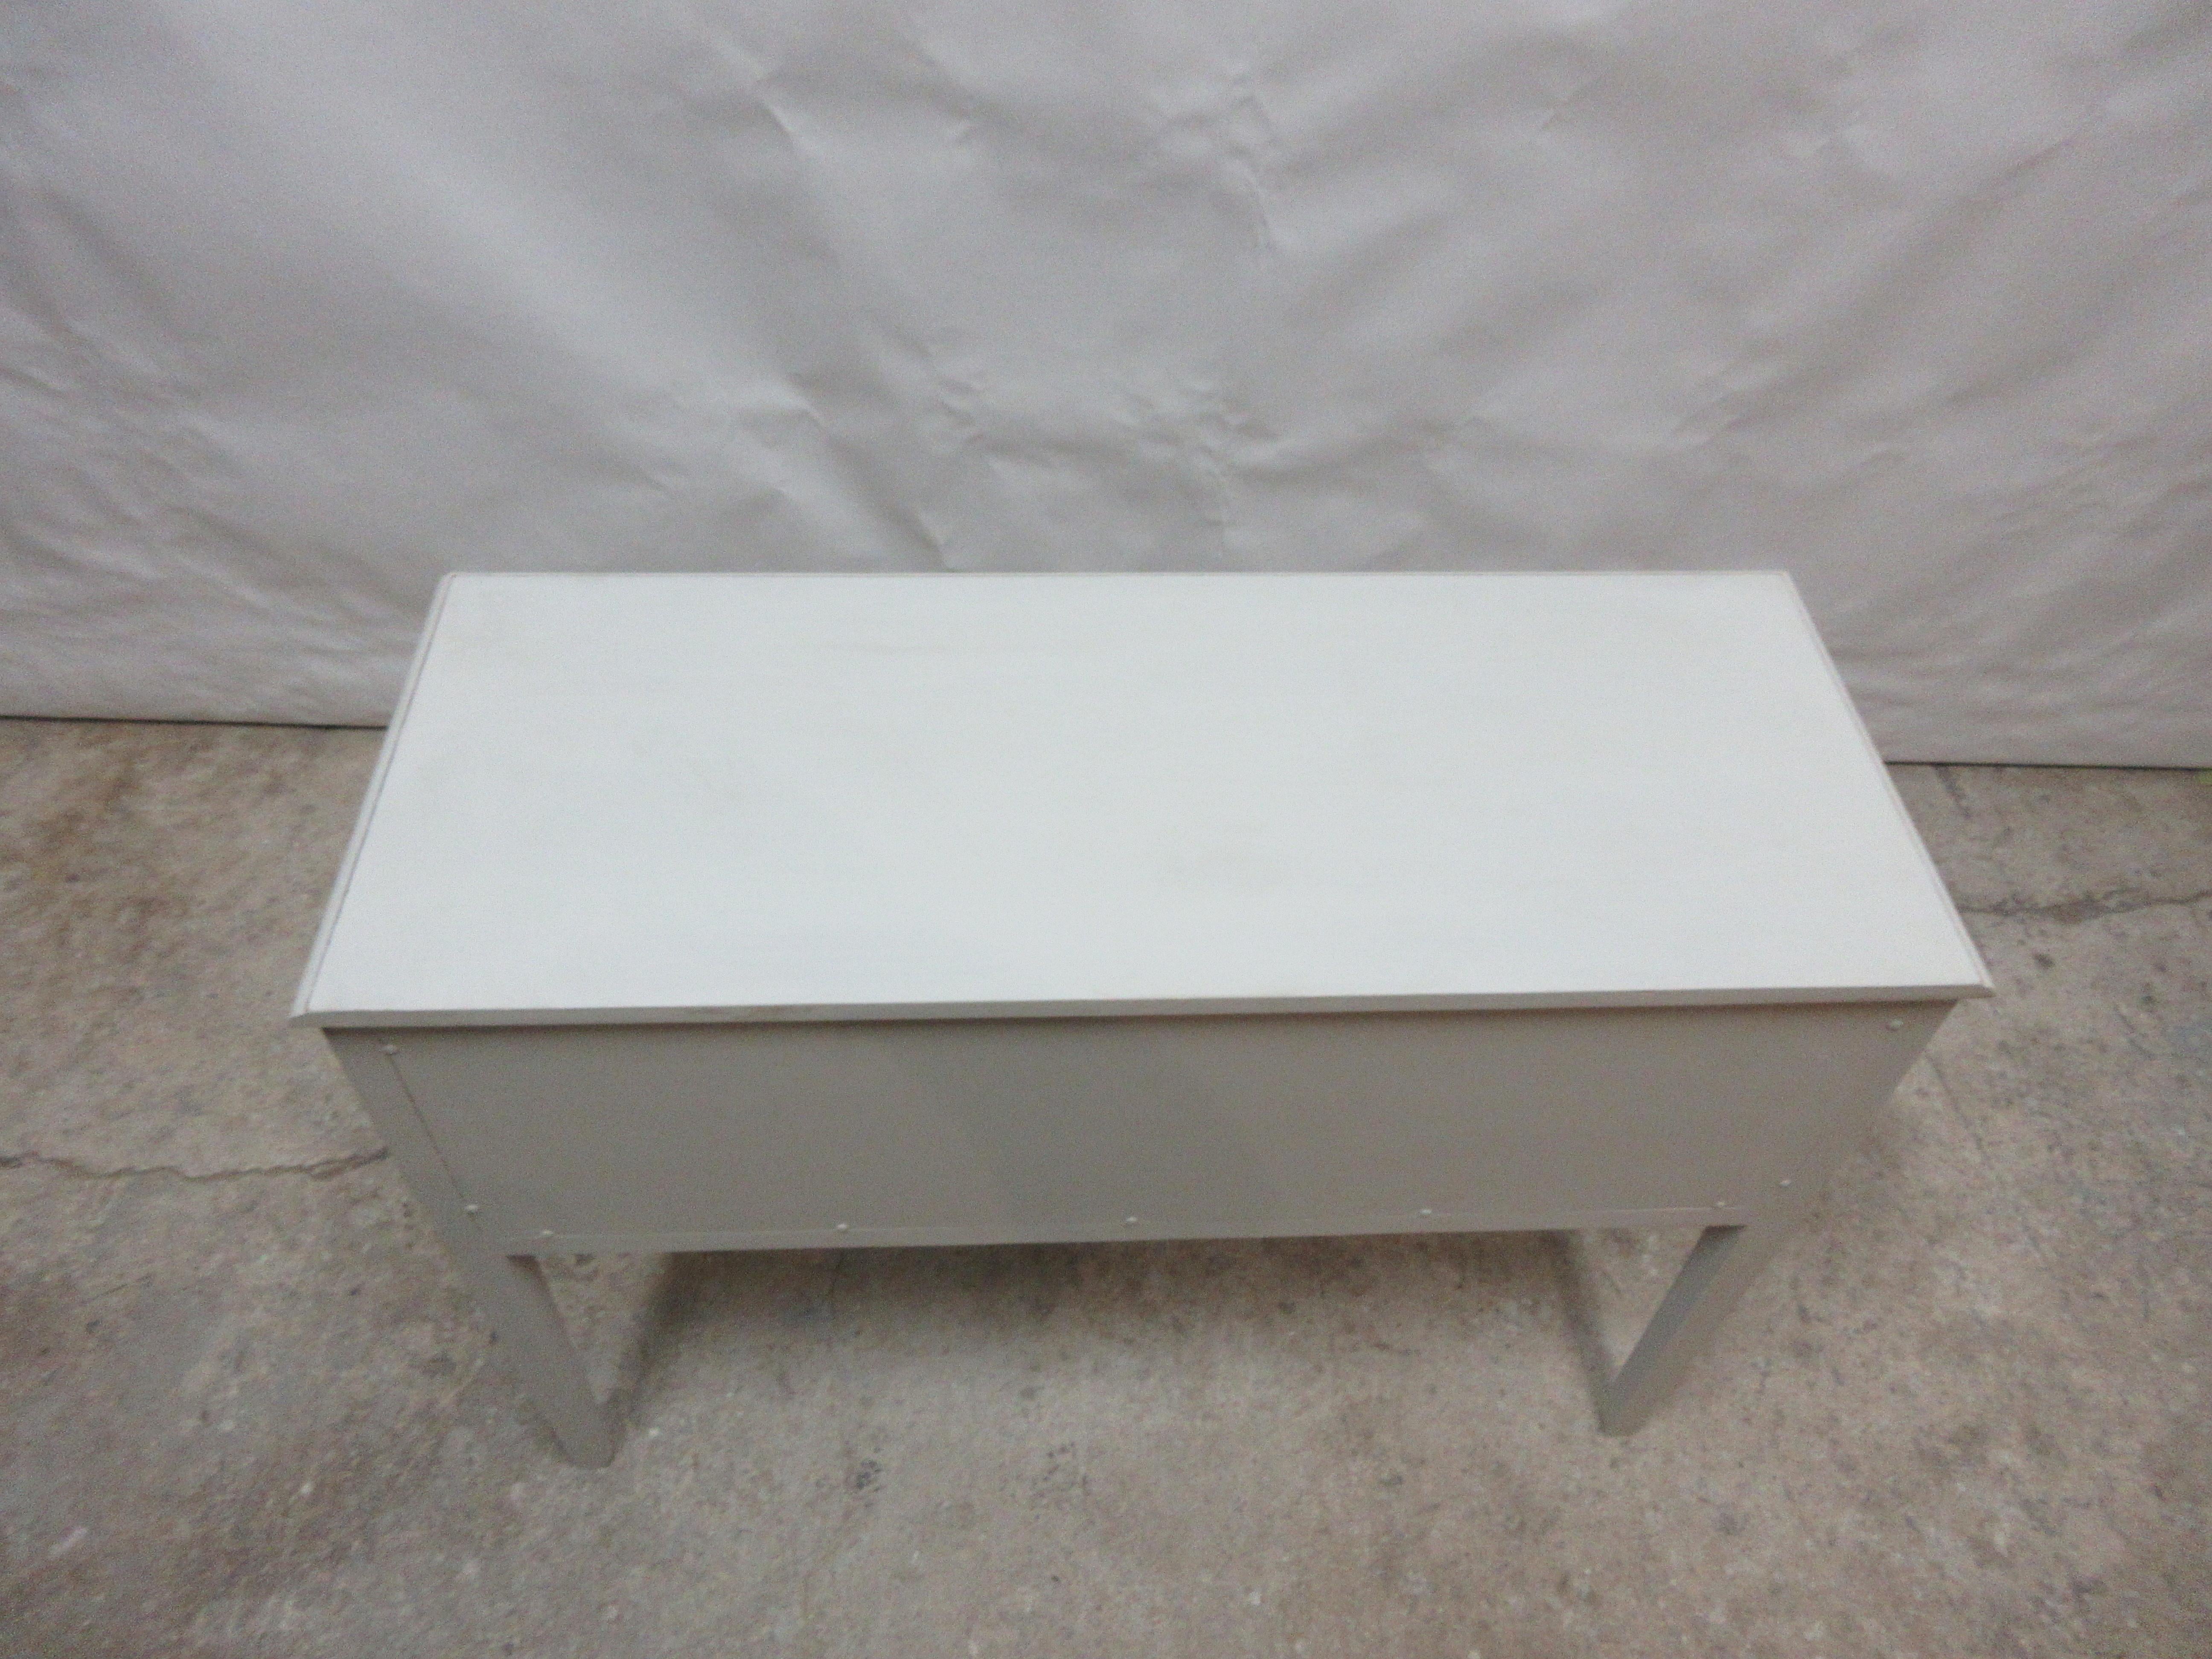 6 inch deep console table